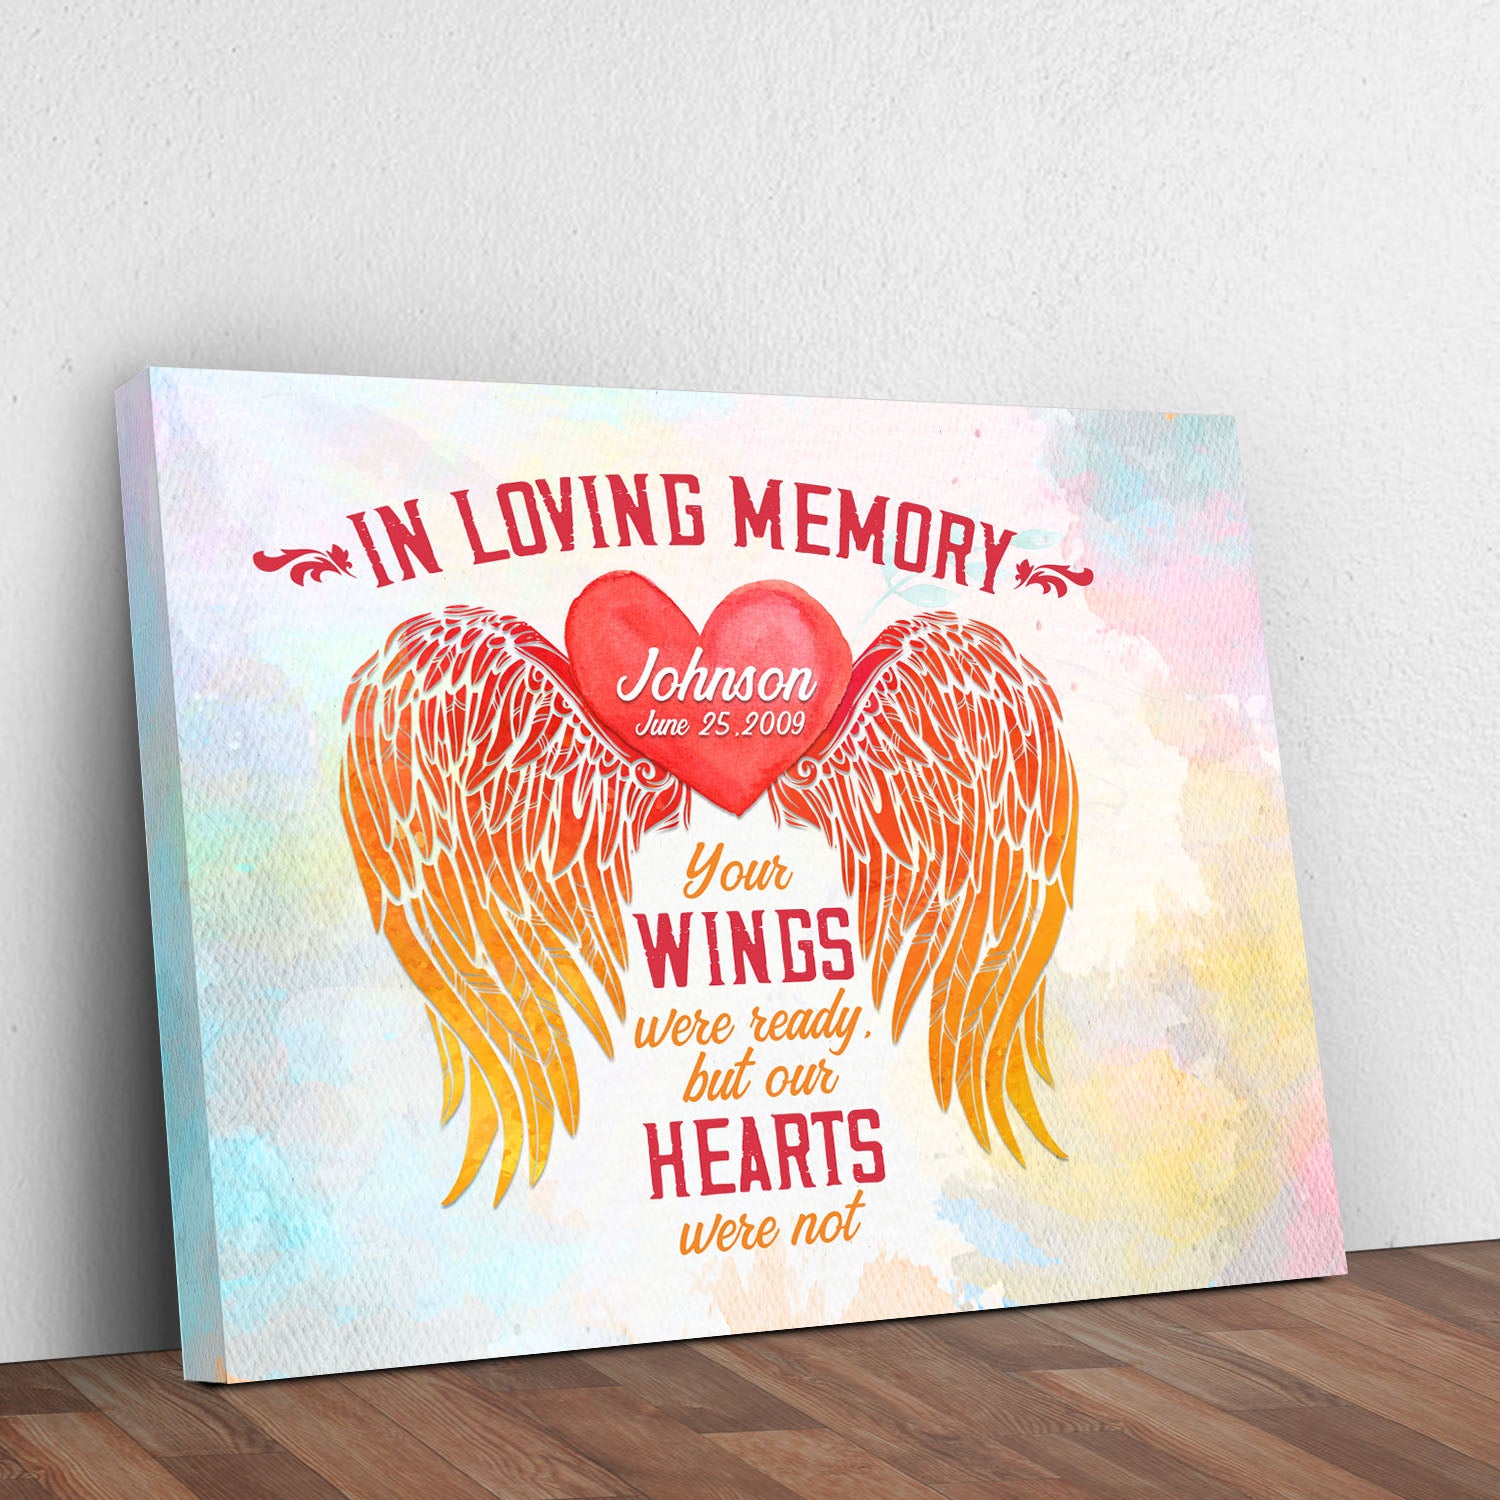 In Loving Memory Sign Style 2 - Image by Tailored Canvases